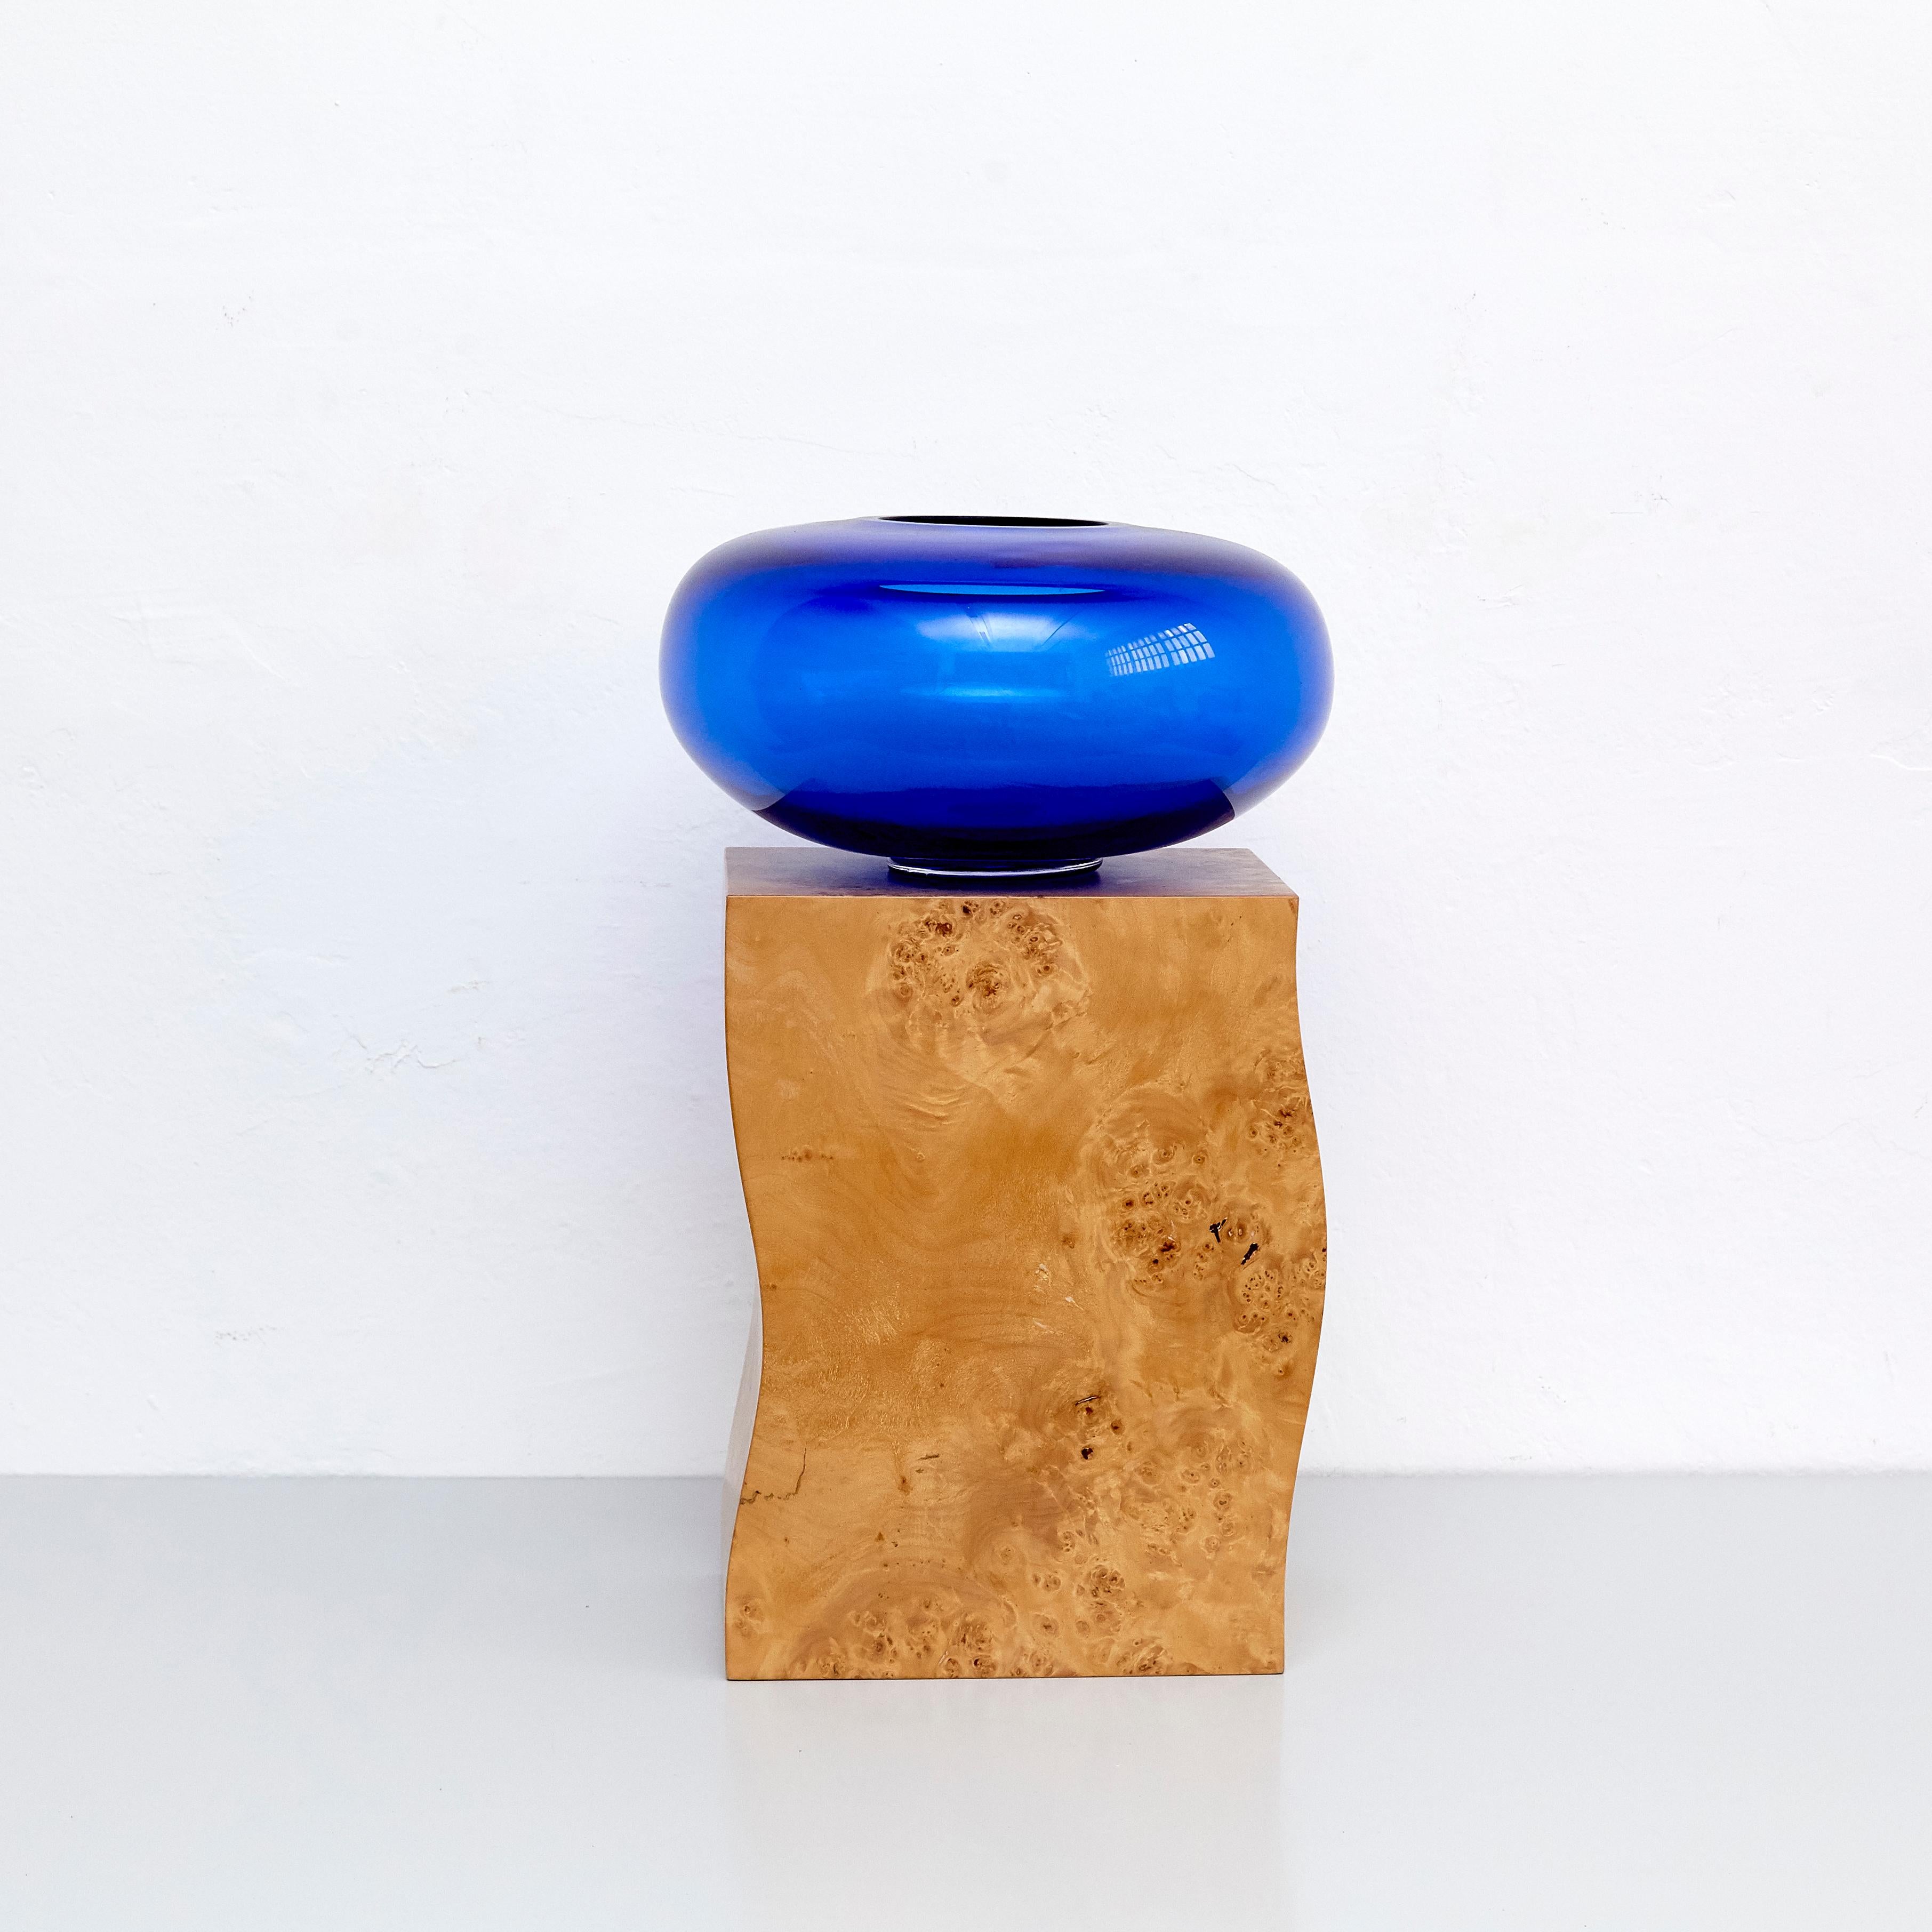 Q Vase made for the collection of twenty-seven woods for Chinese Artificial flowers vase by Ettore Sottsass,
Edited by Design Gallery Milano, 1995.

Limited edition of 12 numbered pieces, number 9 / 12.

In good original condition, with minor